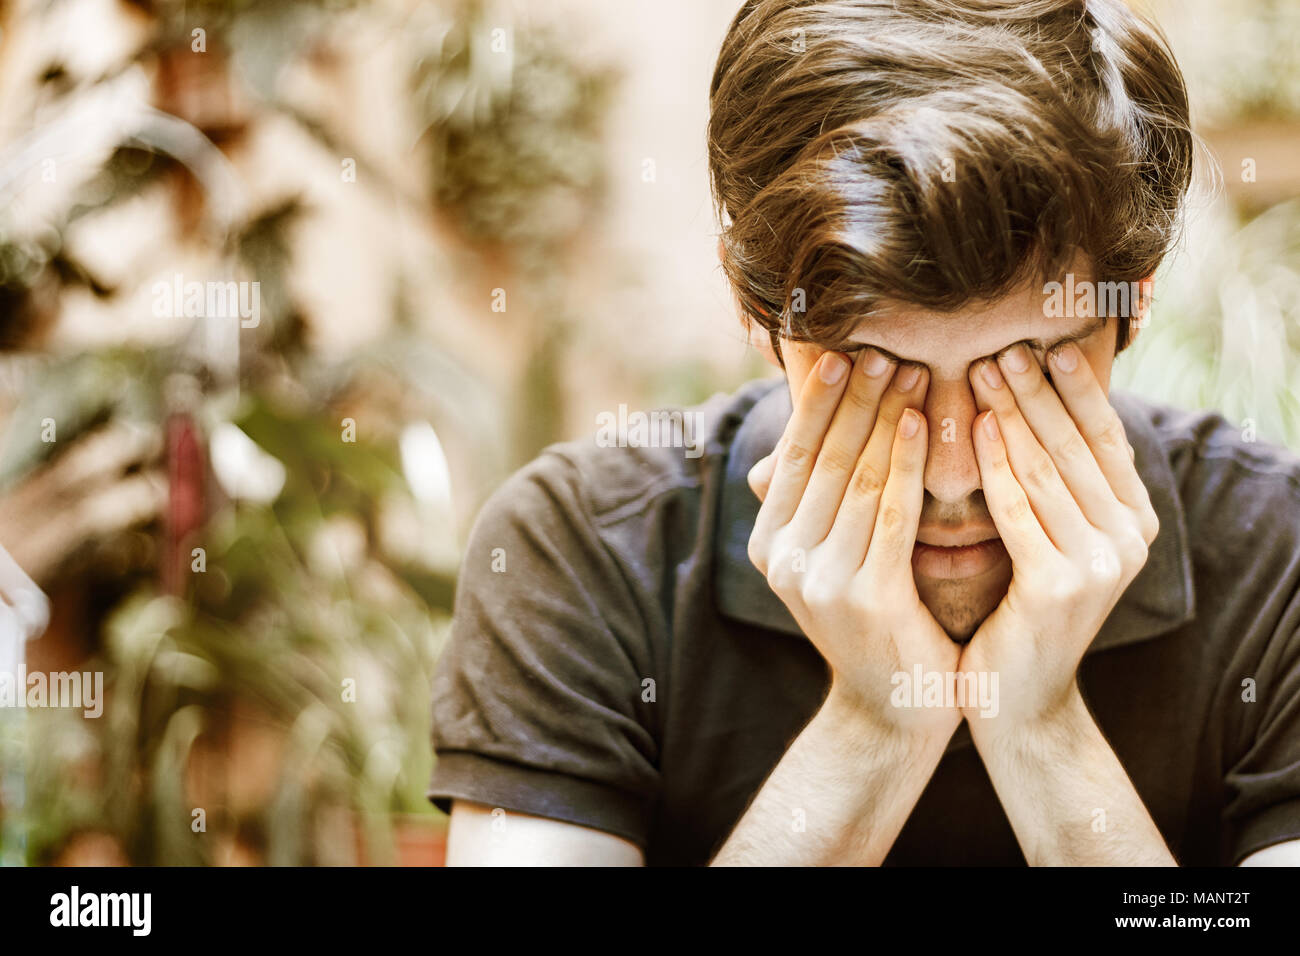 Young man sitting covering his eyes with his hands, sad and depressed concept. Stock Photo